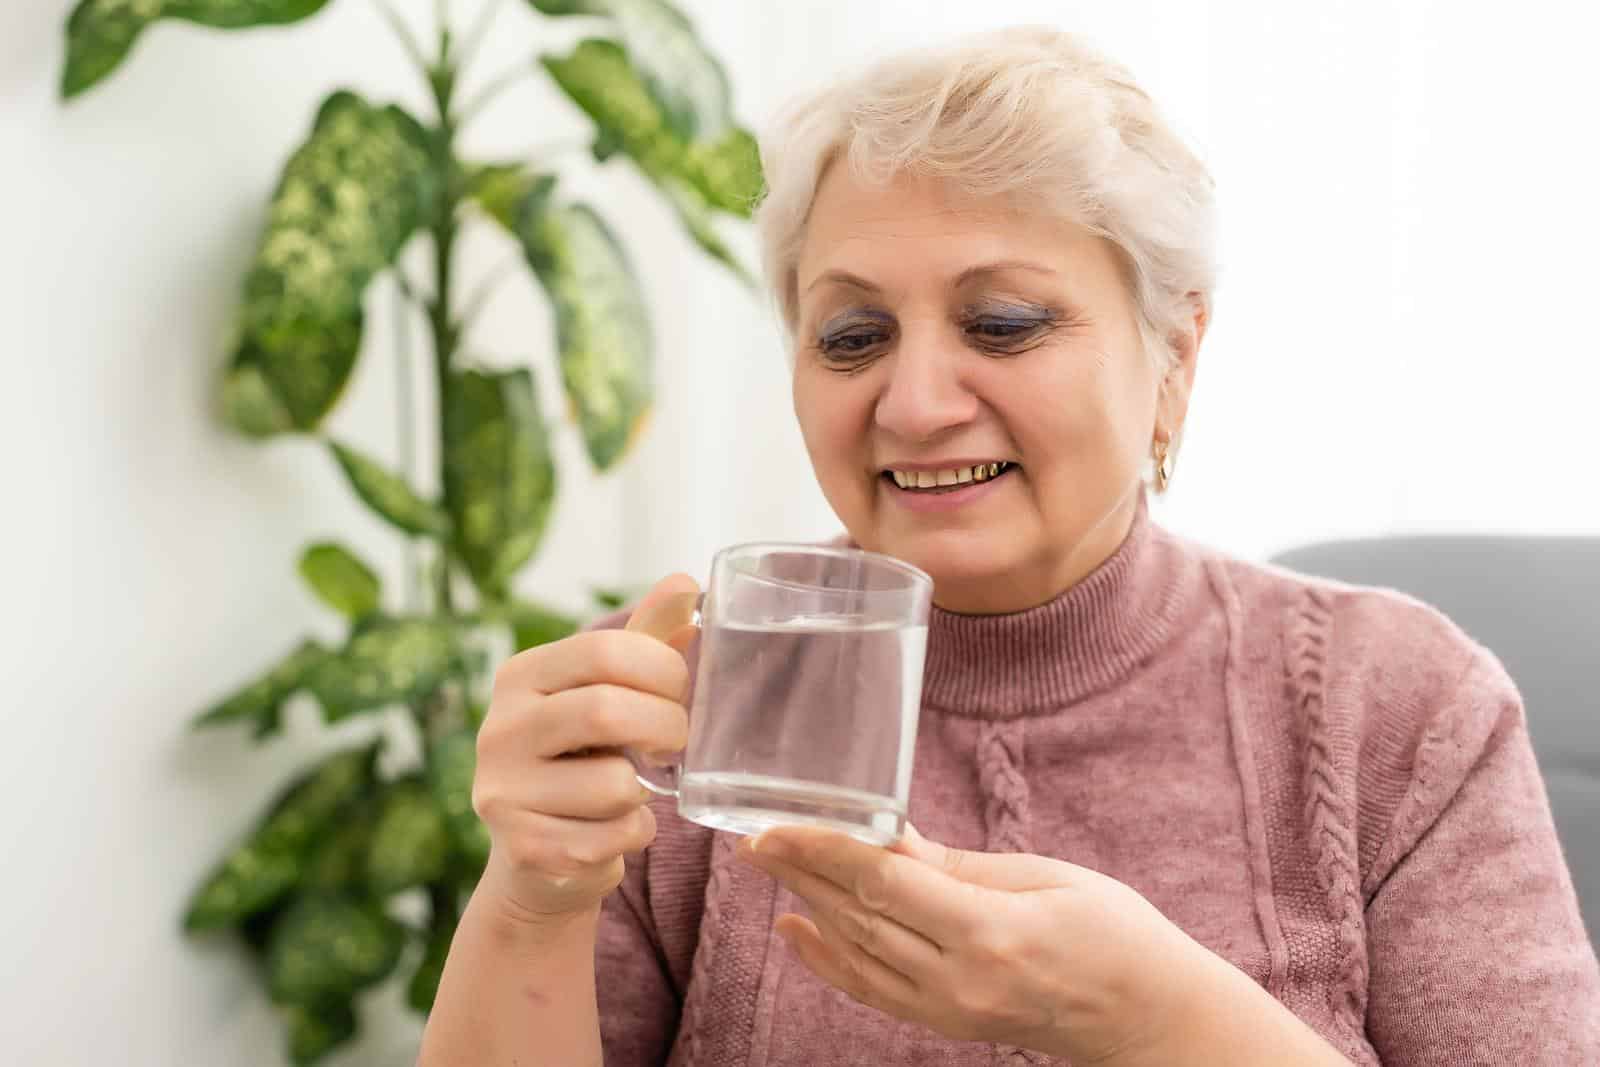 Always staying hydrated by drinking lots of water can also help seniors make their hair healthy.